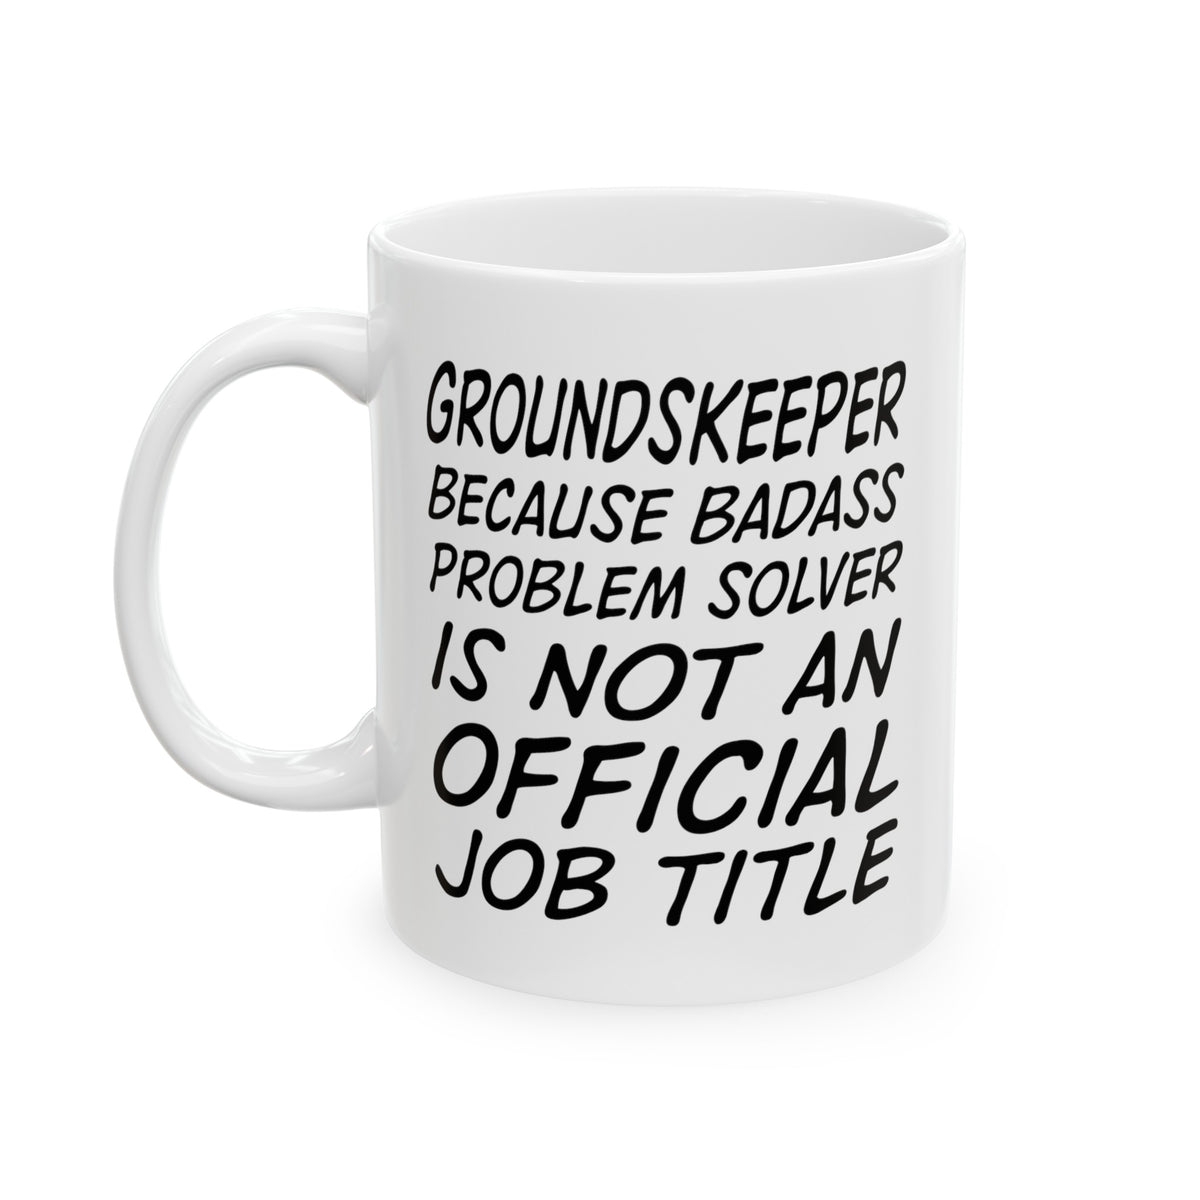 Funny Groundskeeper 11oz Coffee Mug - Because Badass Problem Solver Is Not An Official Job Title. - Best Inspirational Gifts and Sarcasm